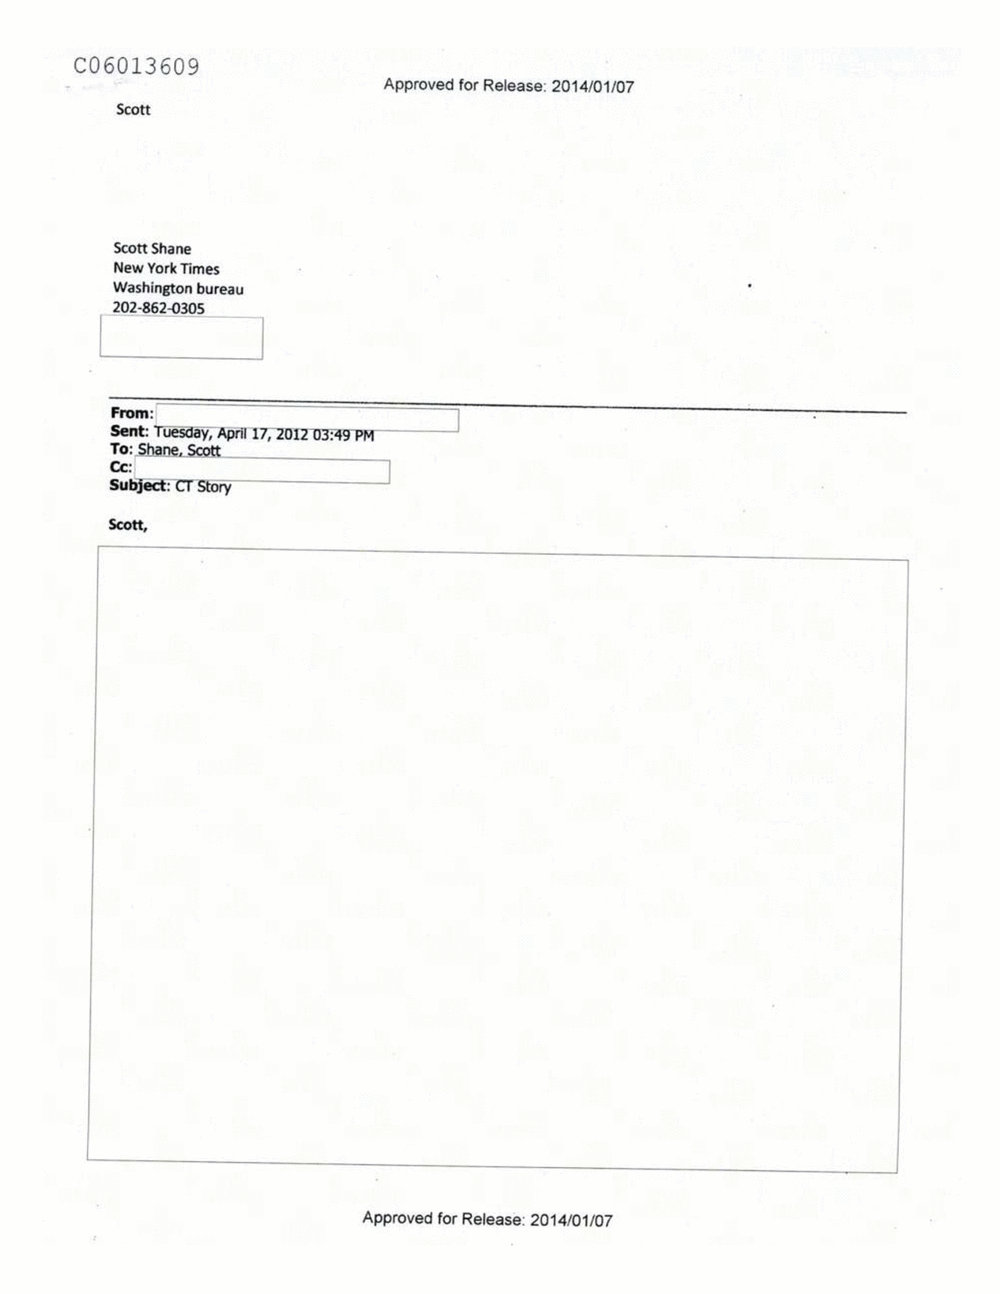 Page 425 from Email Correspondence Between Reporters and CIA Flacks